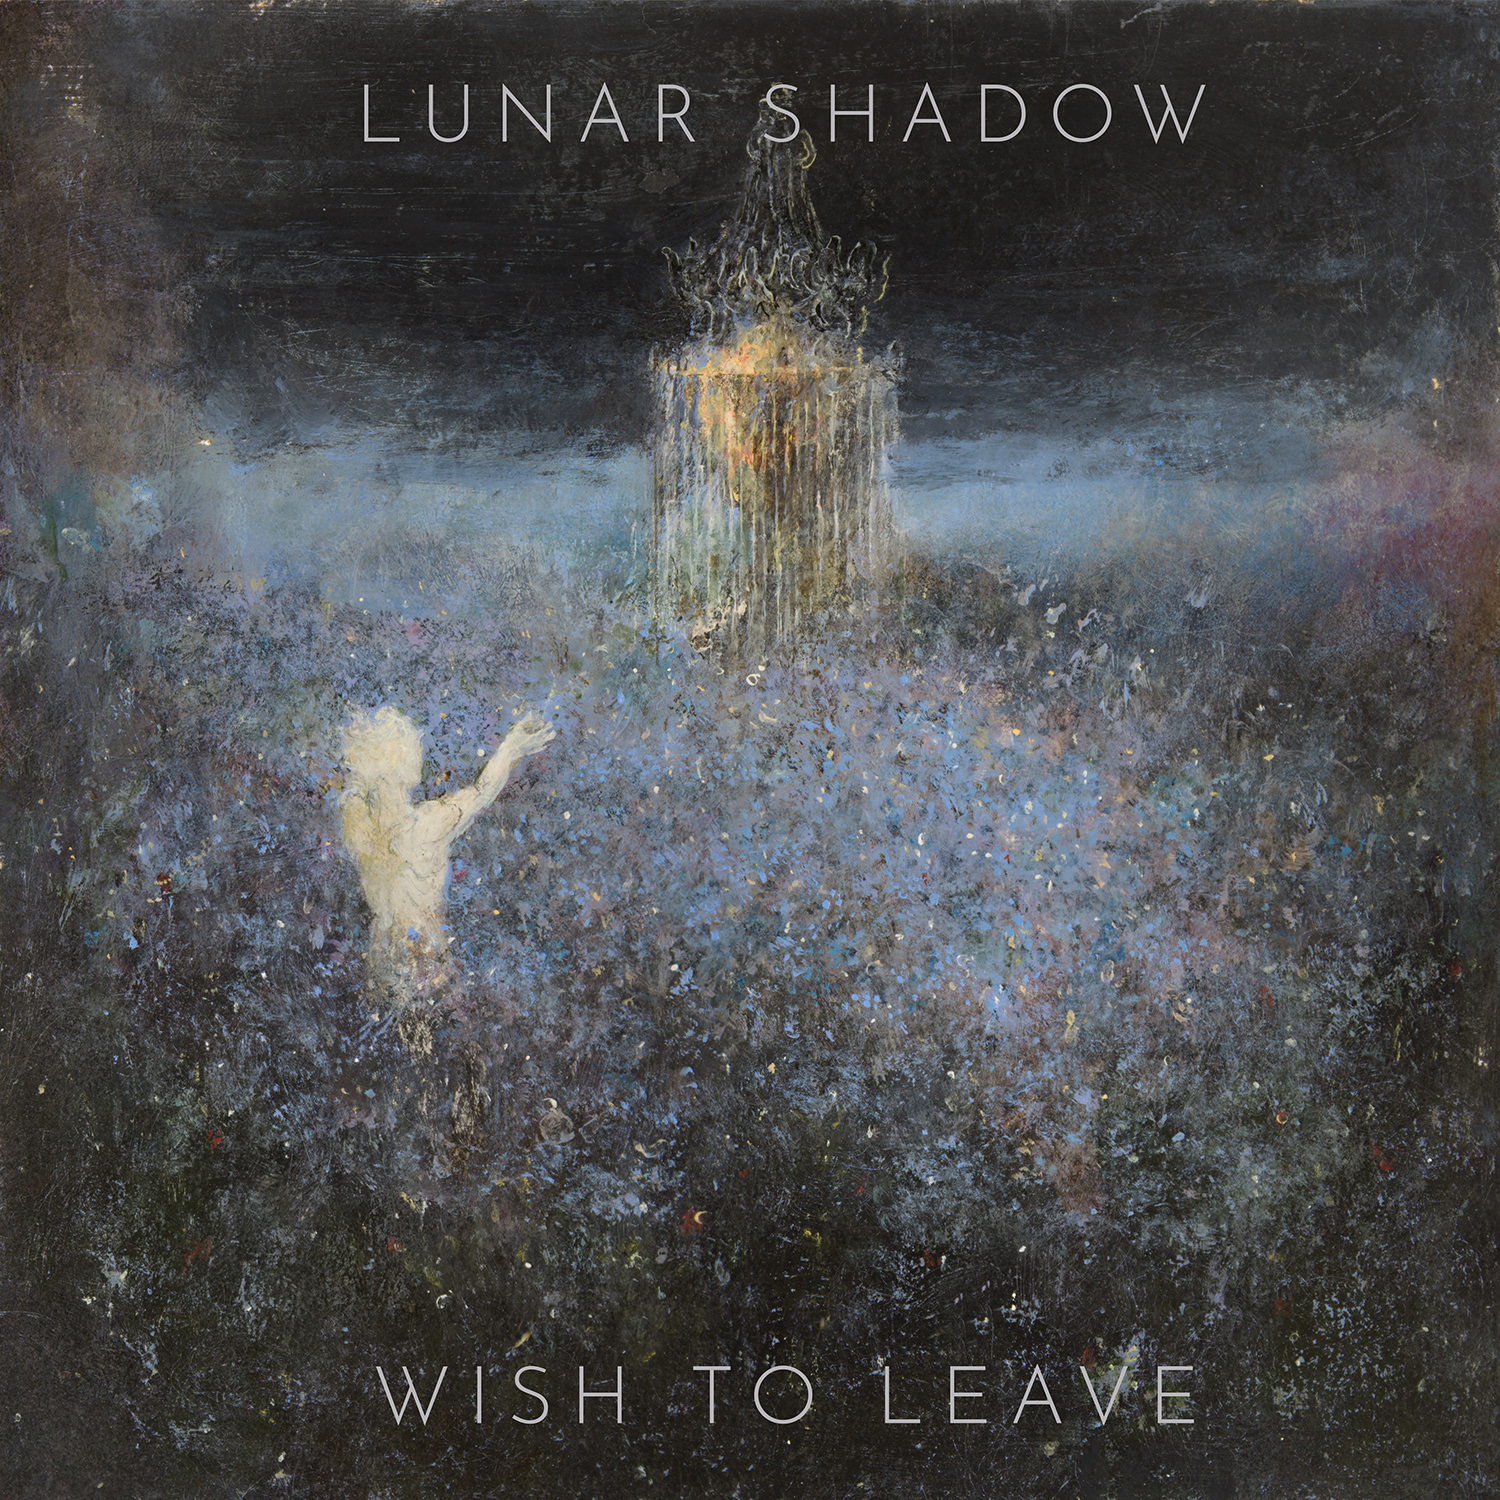 Lunar Shadow – Wish to Leave Review